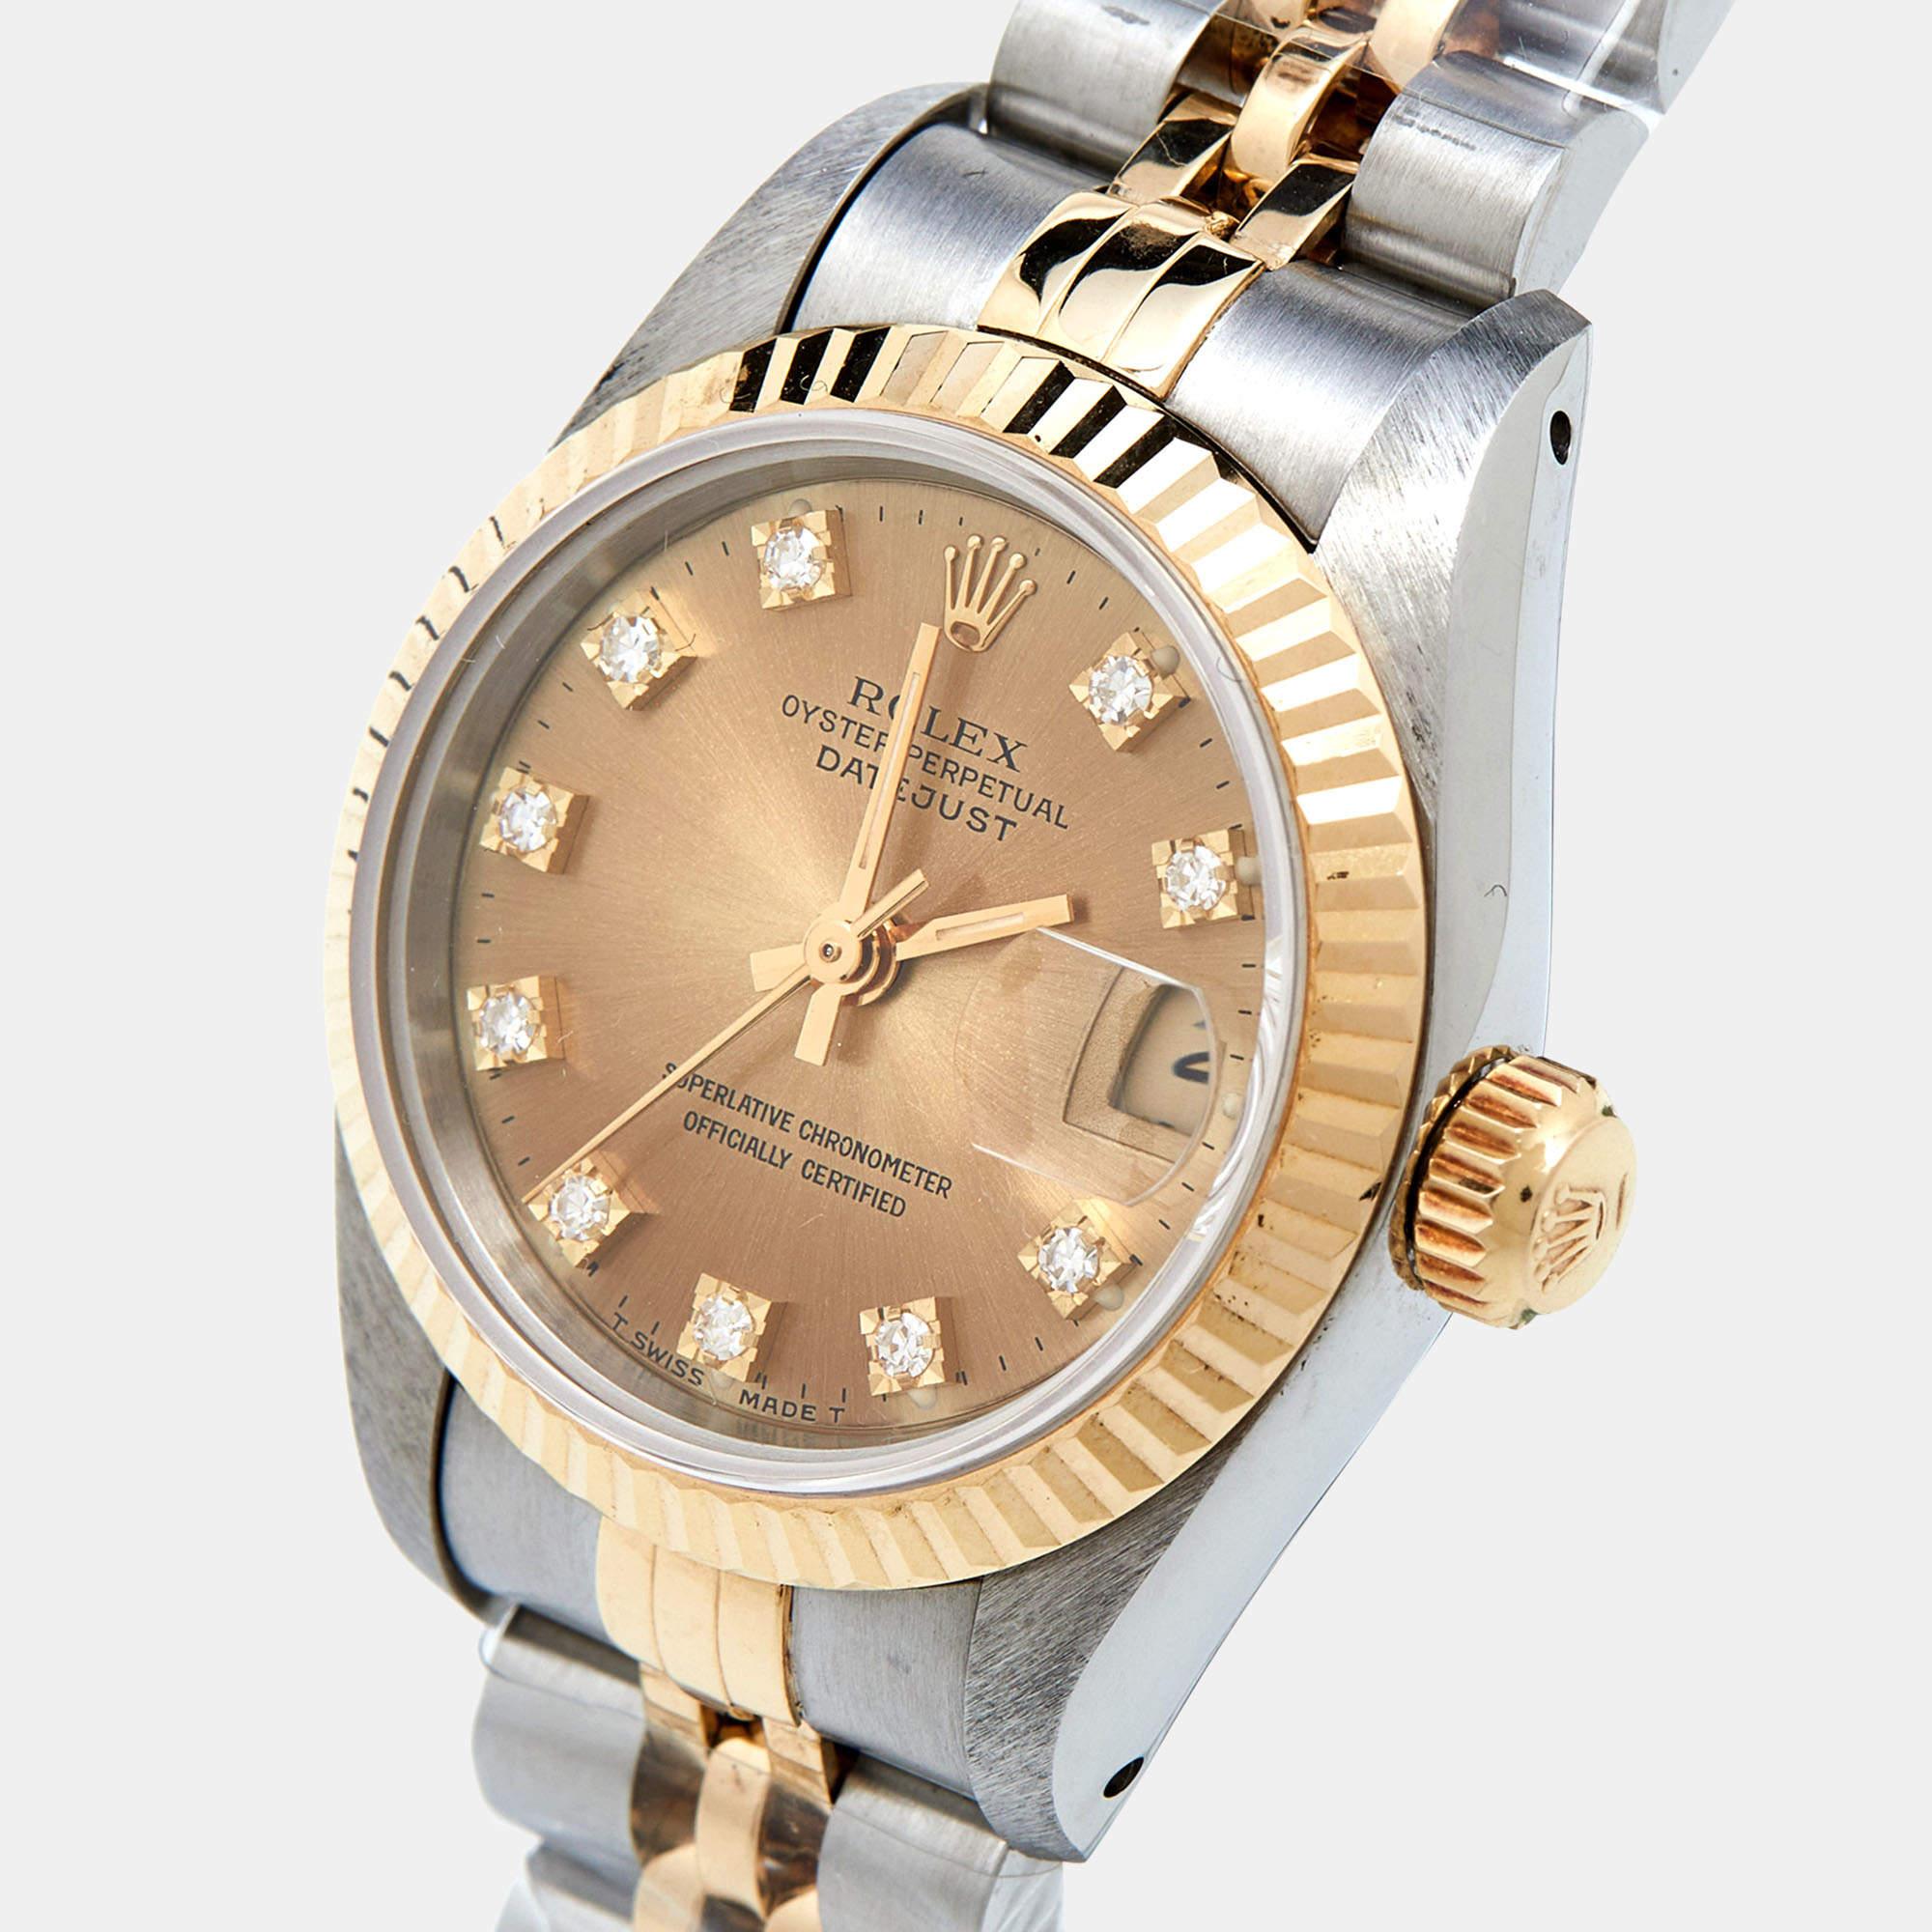 The Datejust is one of the most recognized and coveted watches from the house of Rolex. It has a distinct look and an irrefutable appeal. Crafted beautifully, this authentic Rolex Datejust wristwatch has the signature allure and the promise of